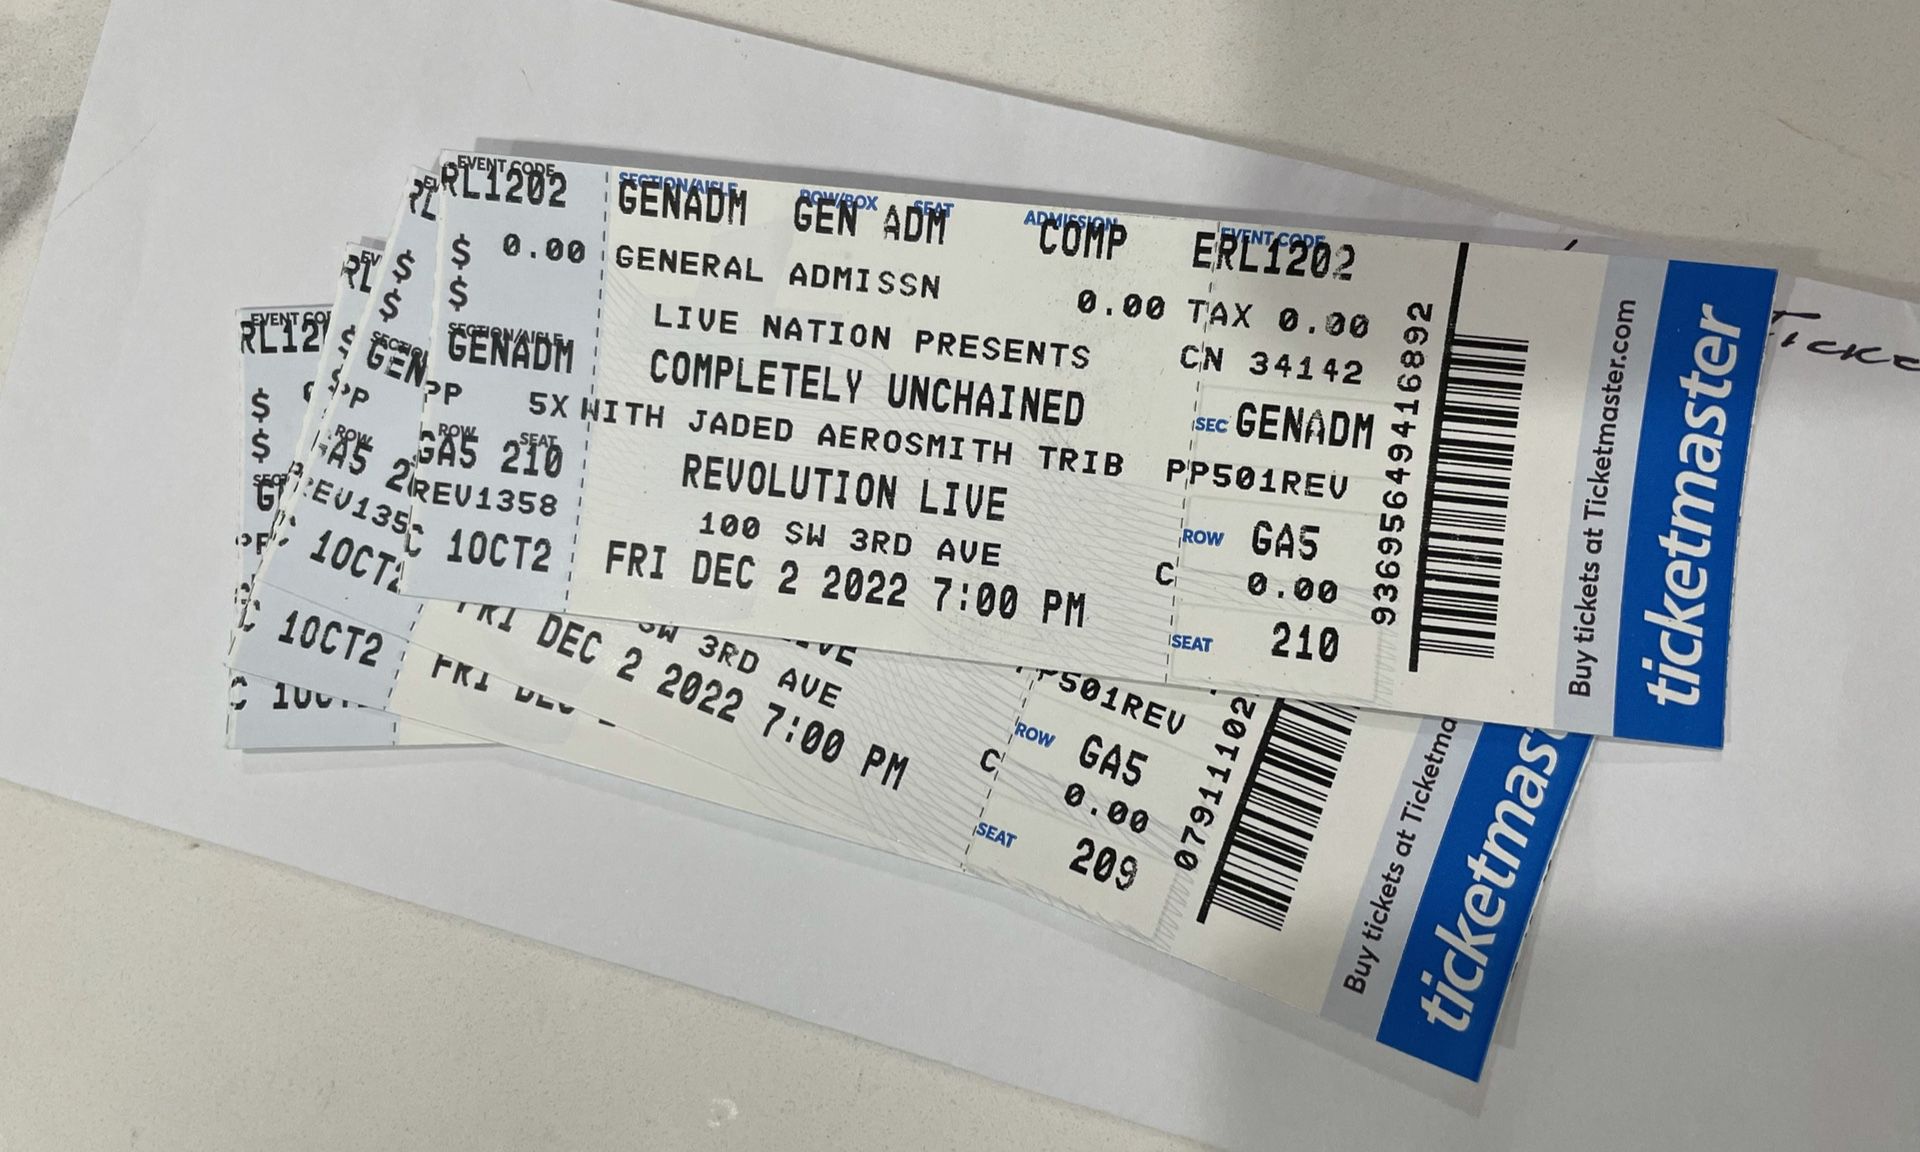 Completely Unchained Aerosmith Tickets